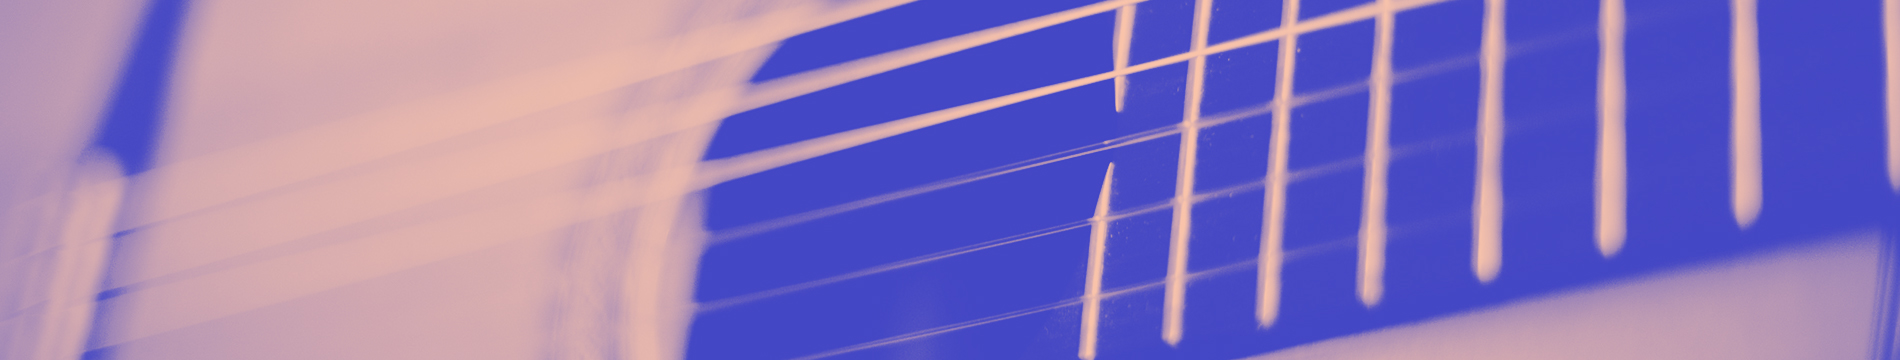 Color effected image of acoustic guitar